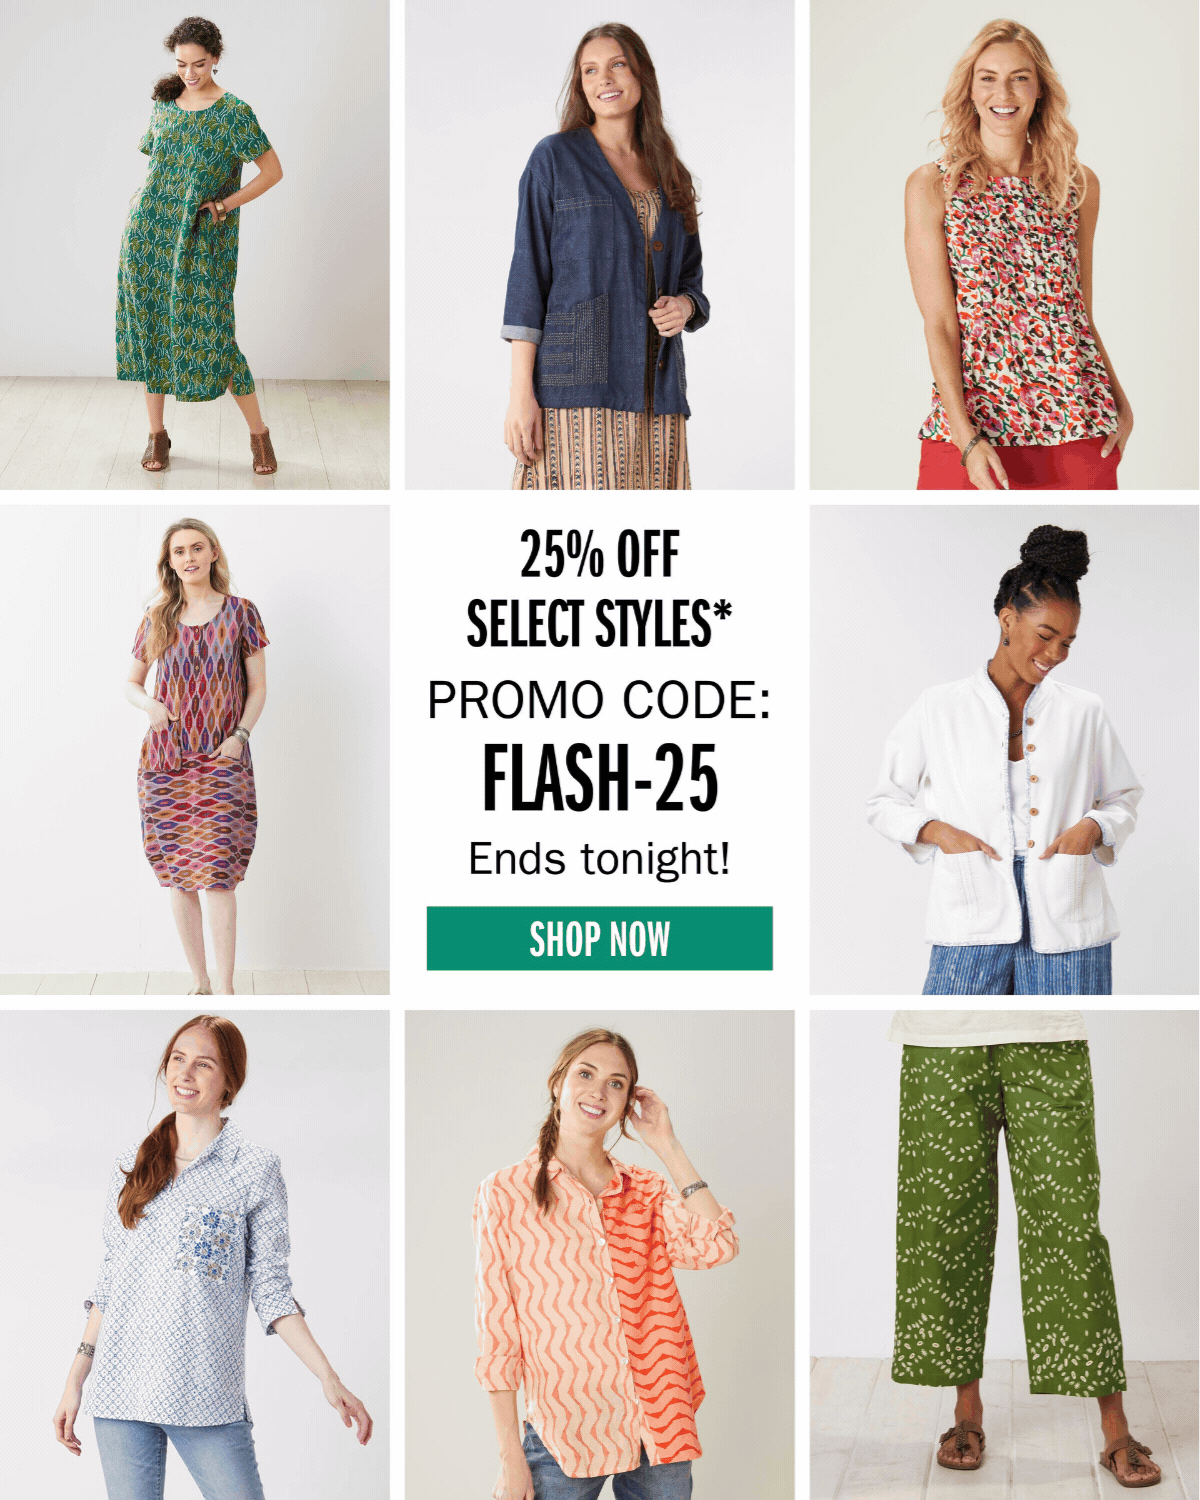 25% OFF SELECT STYLES* PROMO CODE: FLASH-25 Ends tonight! SHOP NOW